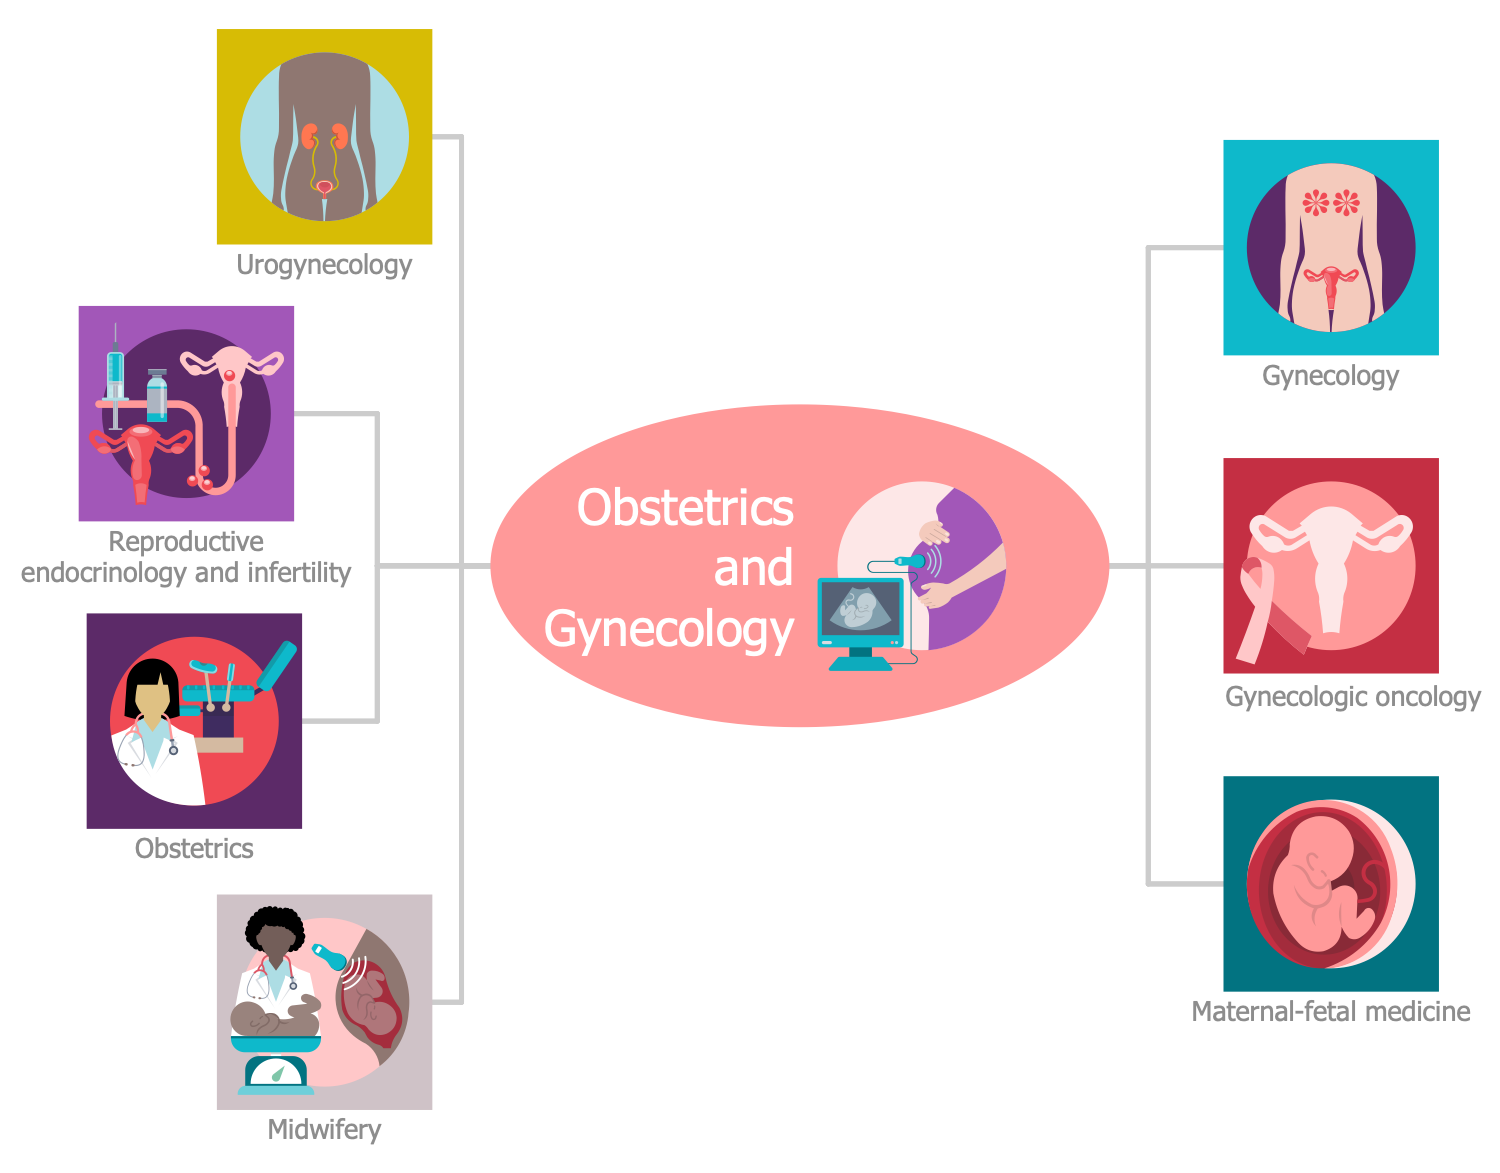 Obstetrics and Gynaecology